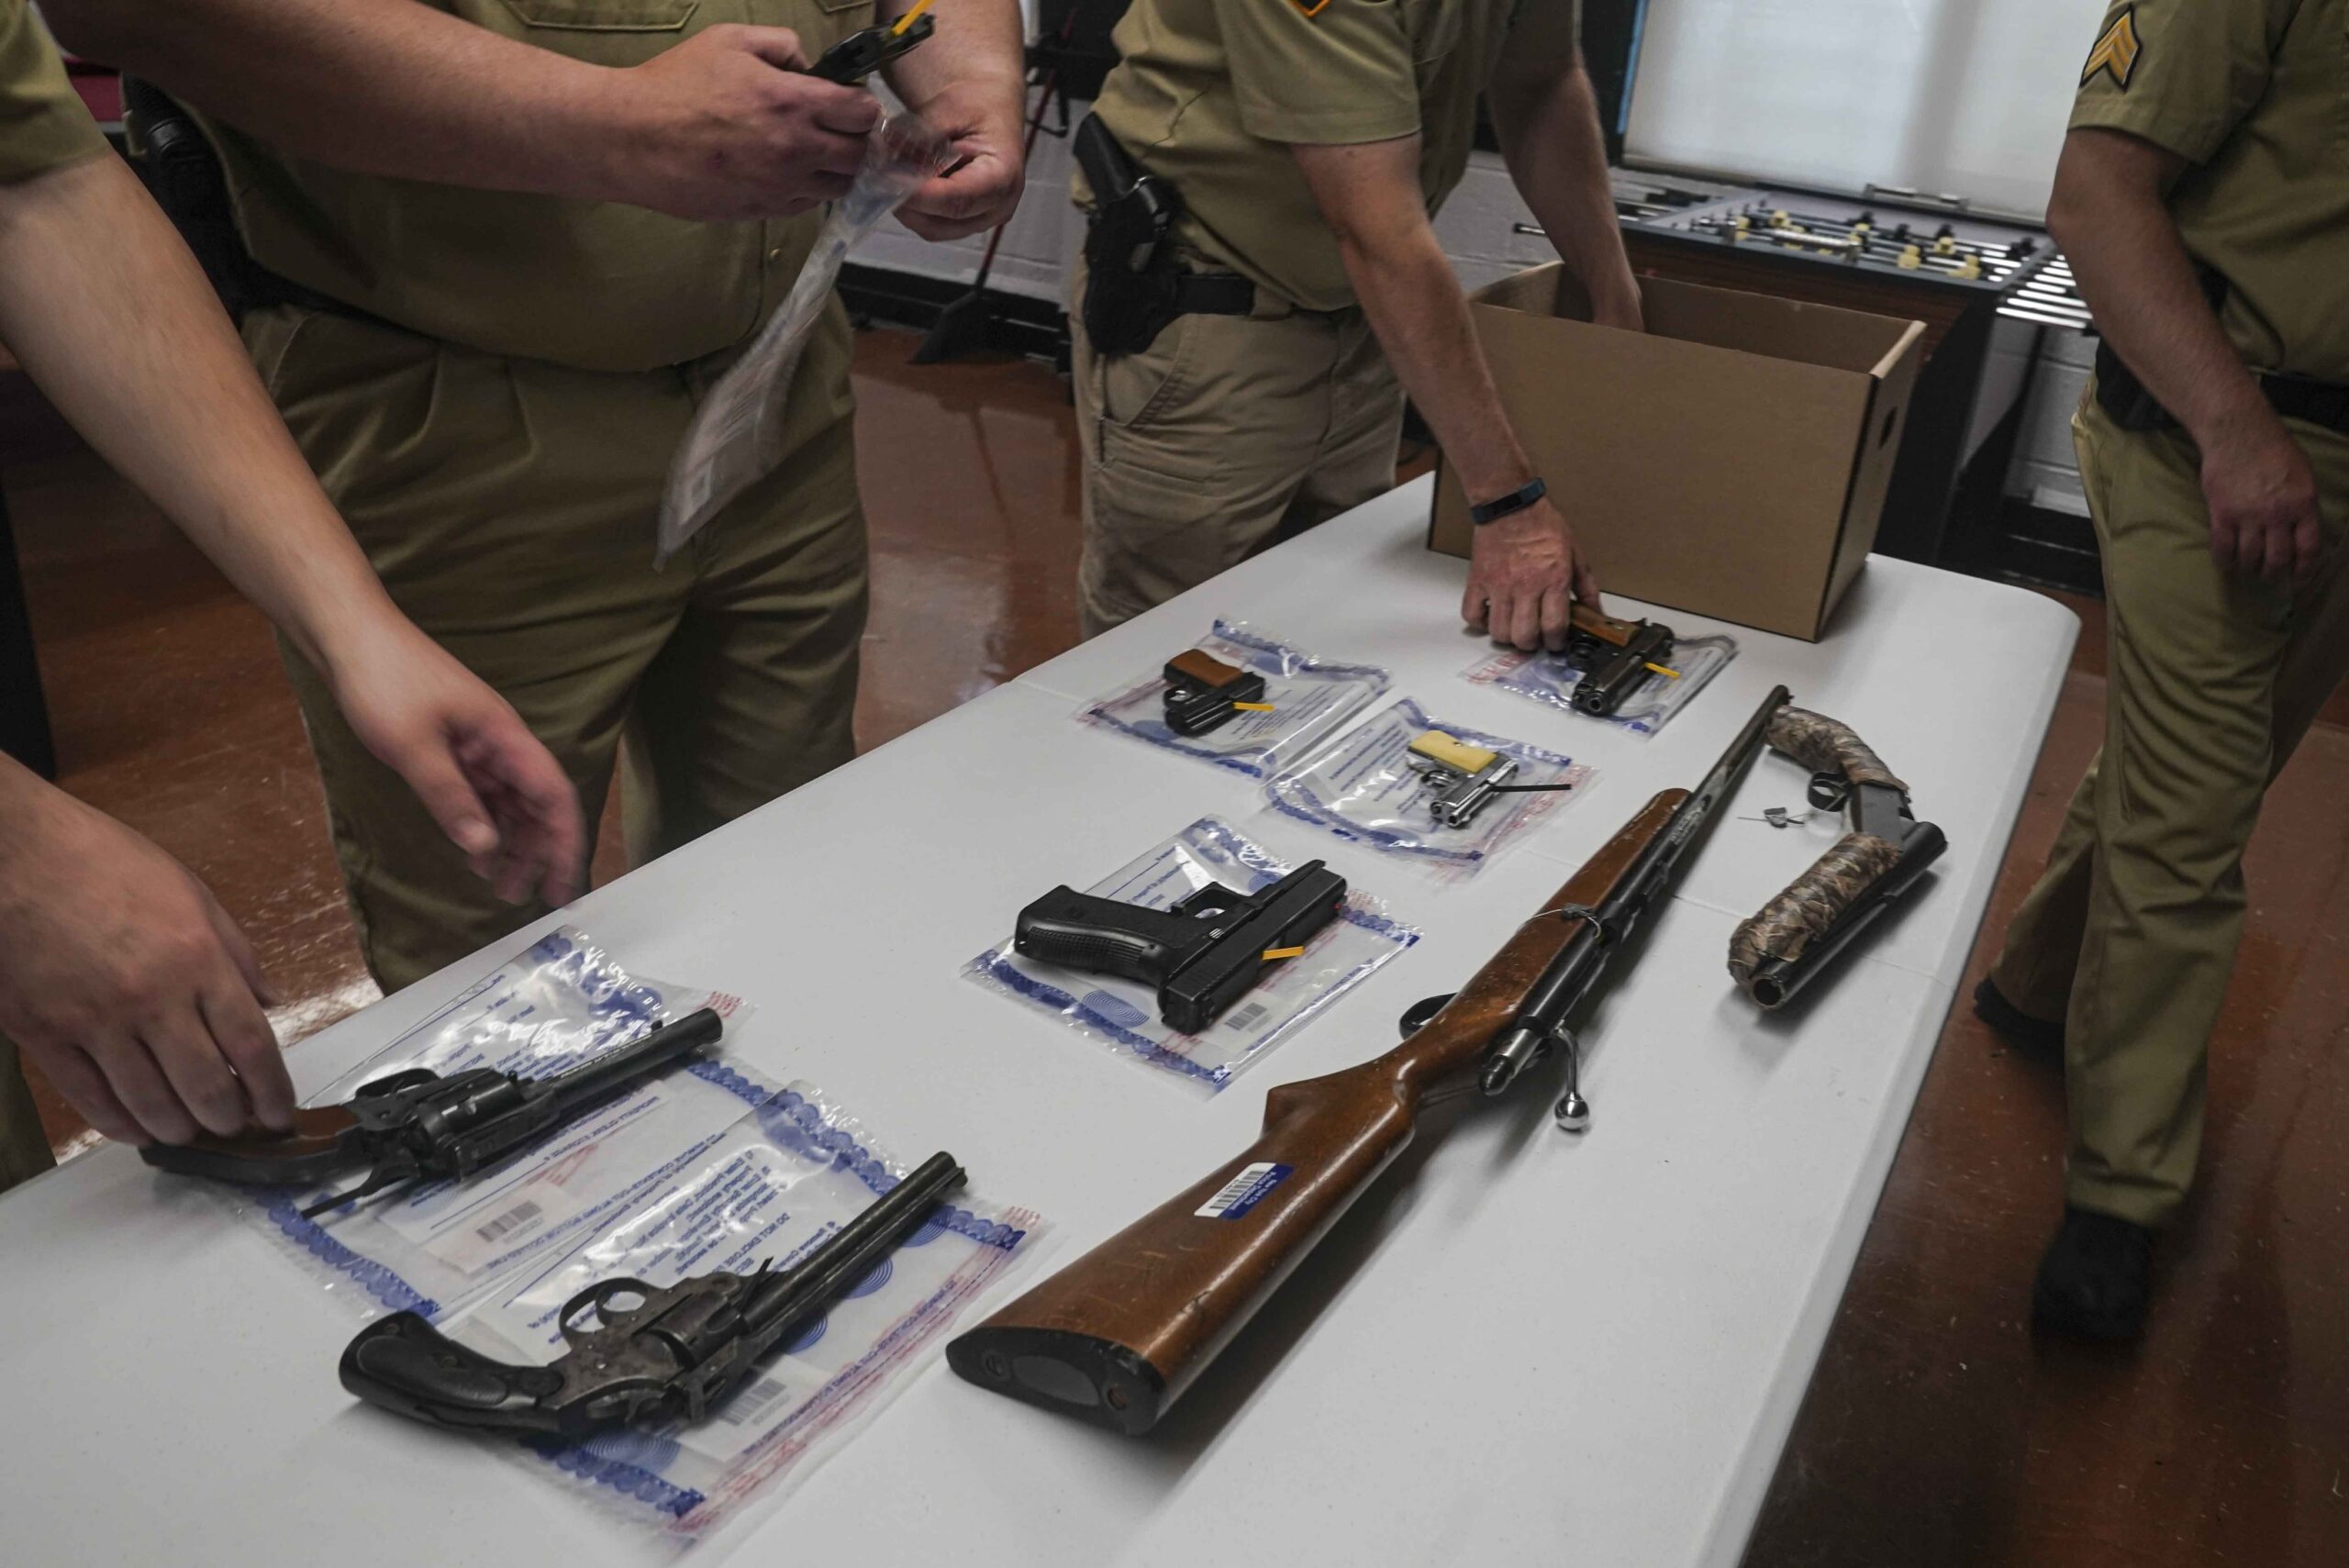 Police officers with firearms from a buyback program